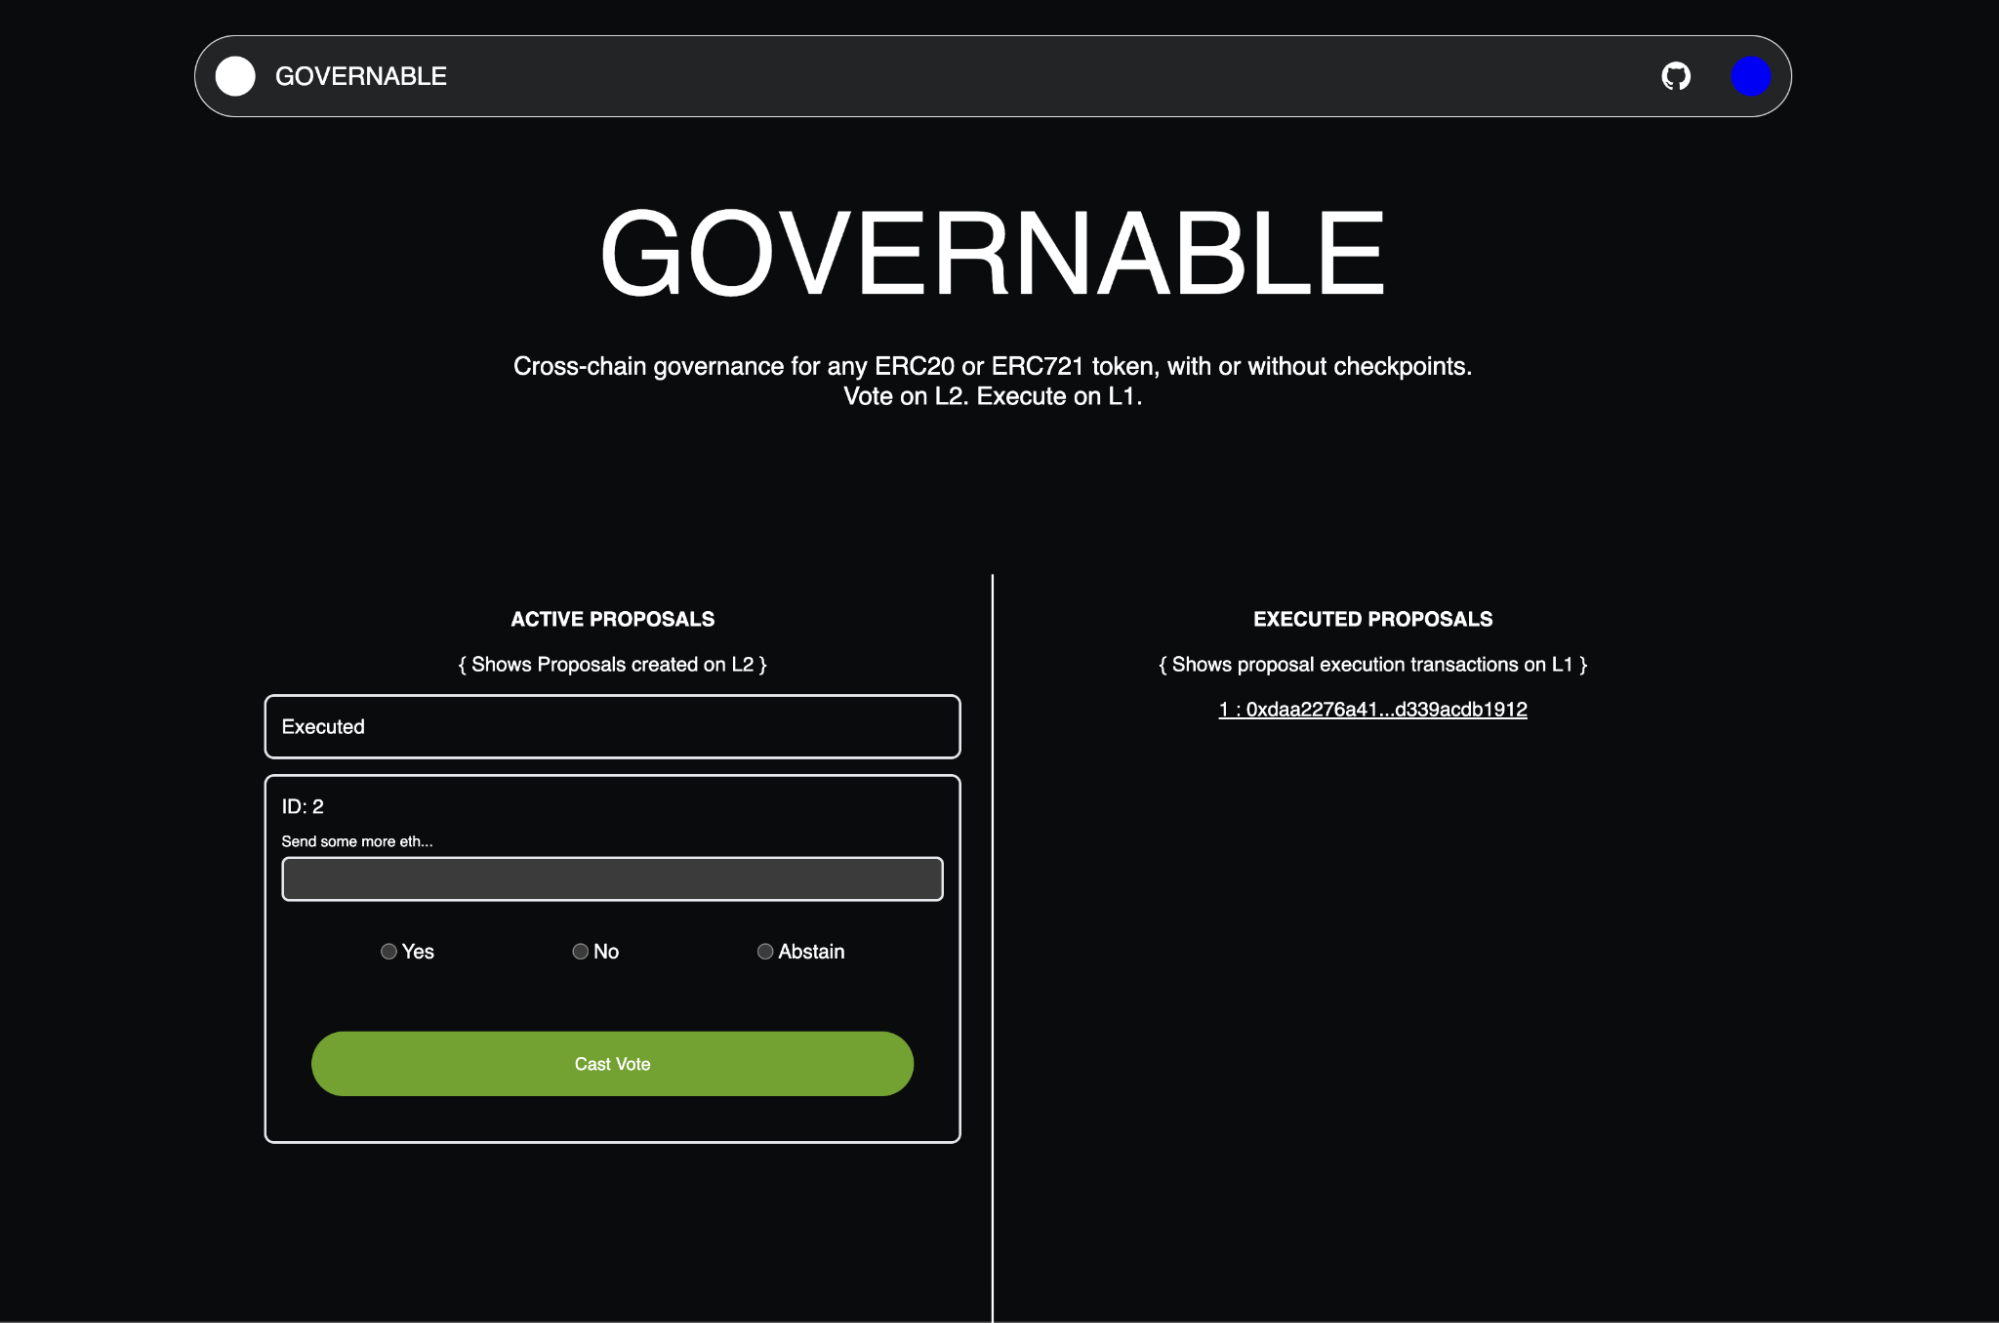 Governable dApp UI enabling cross-chain governance for any ERC20 or ERC721 token, with active proposals and executed proposals sections.